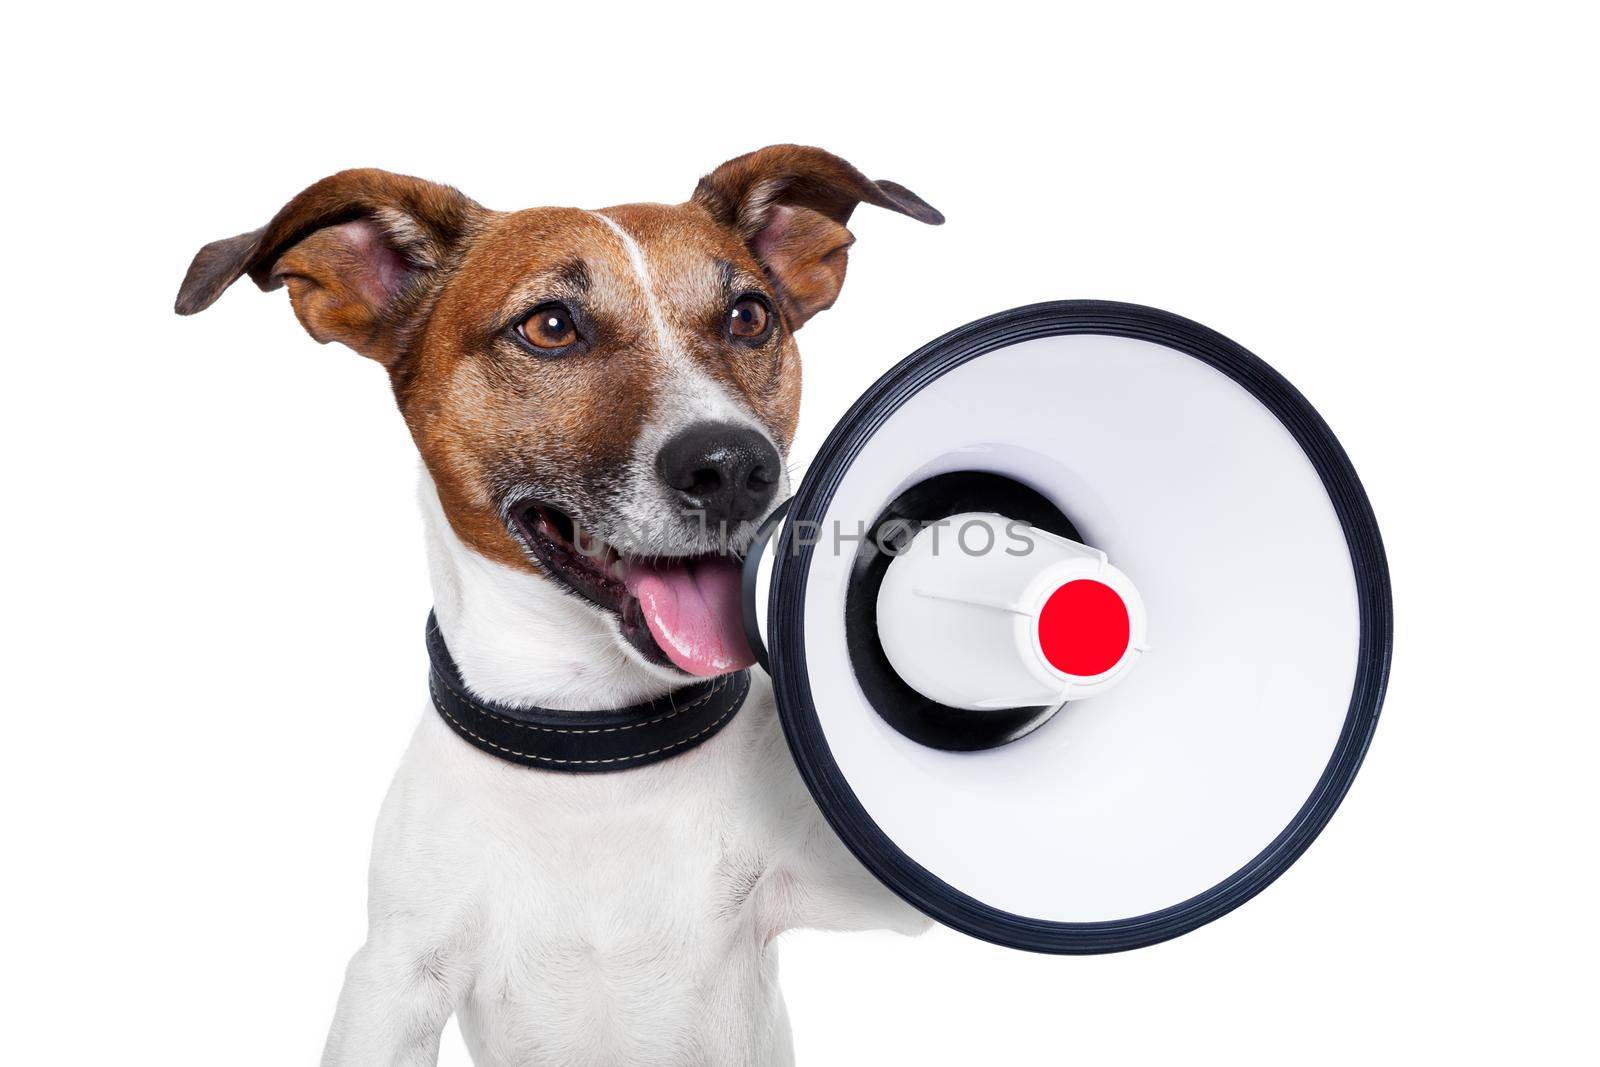 dog shouting into a white and red megaphone